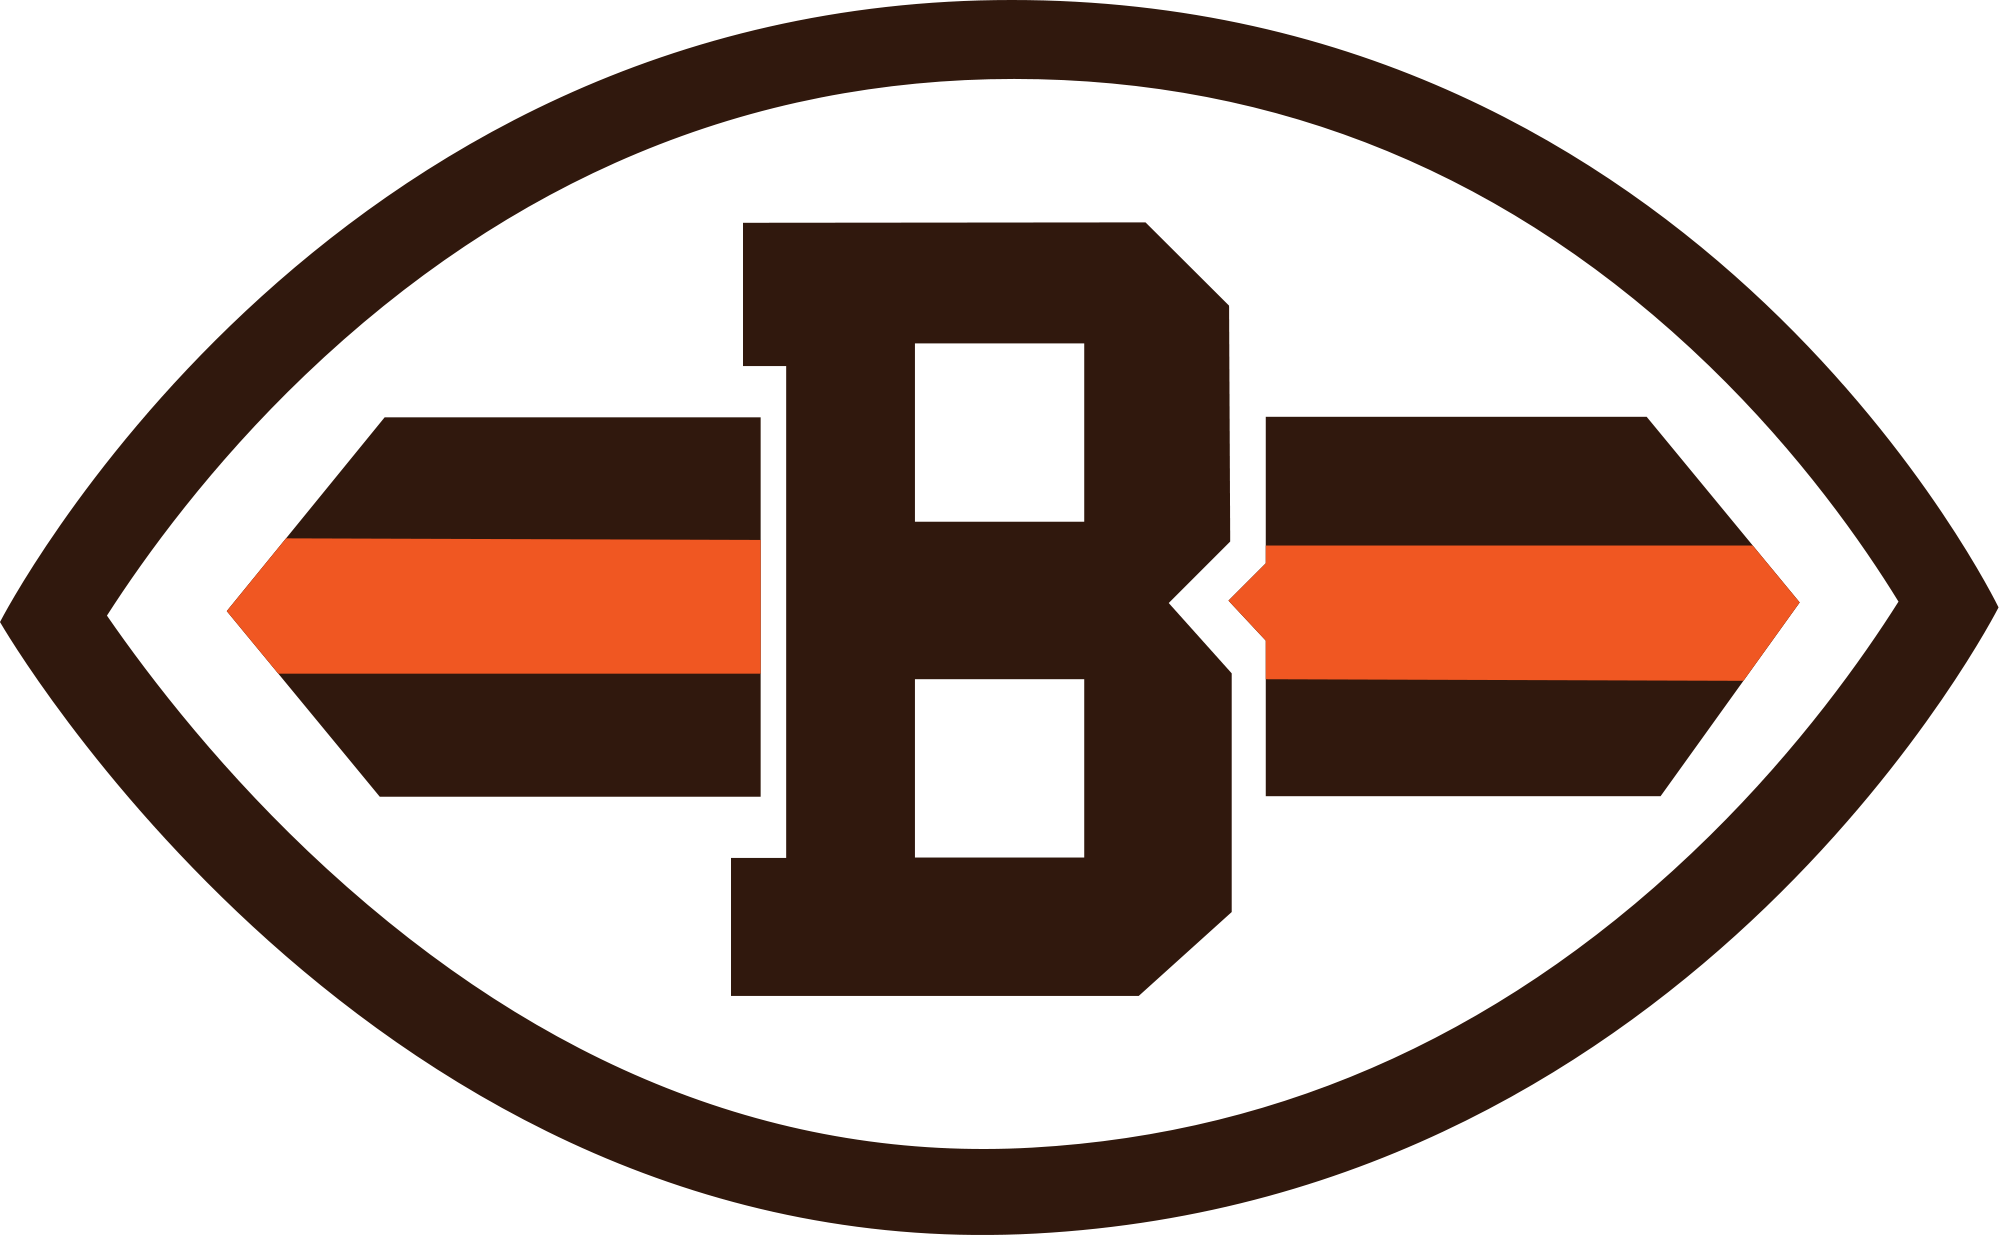 Cleveland Browns Logo - Cleveland Browns Logo transparent PNG